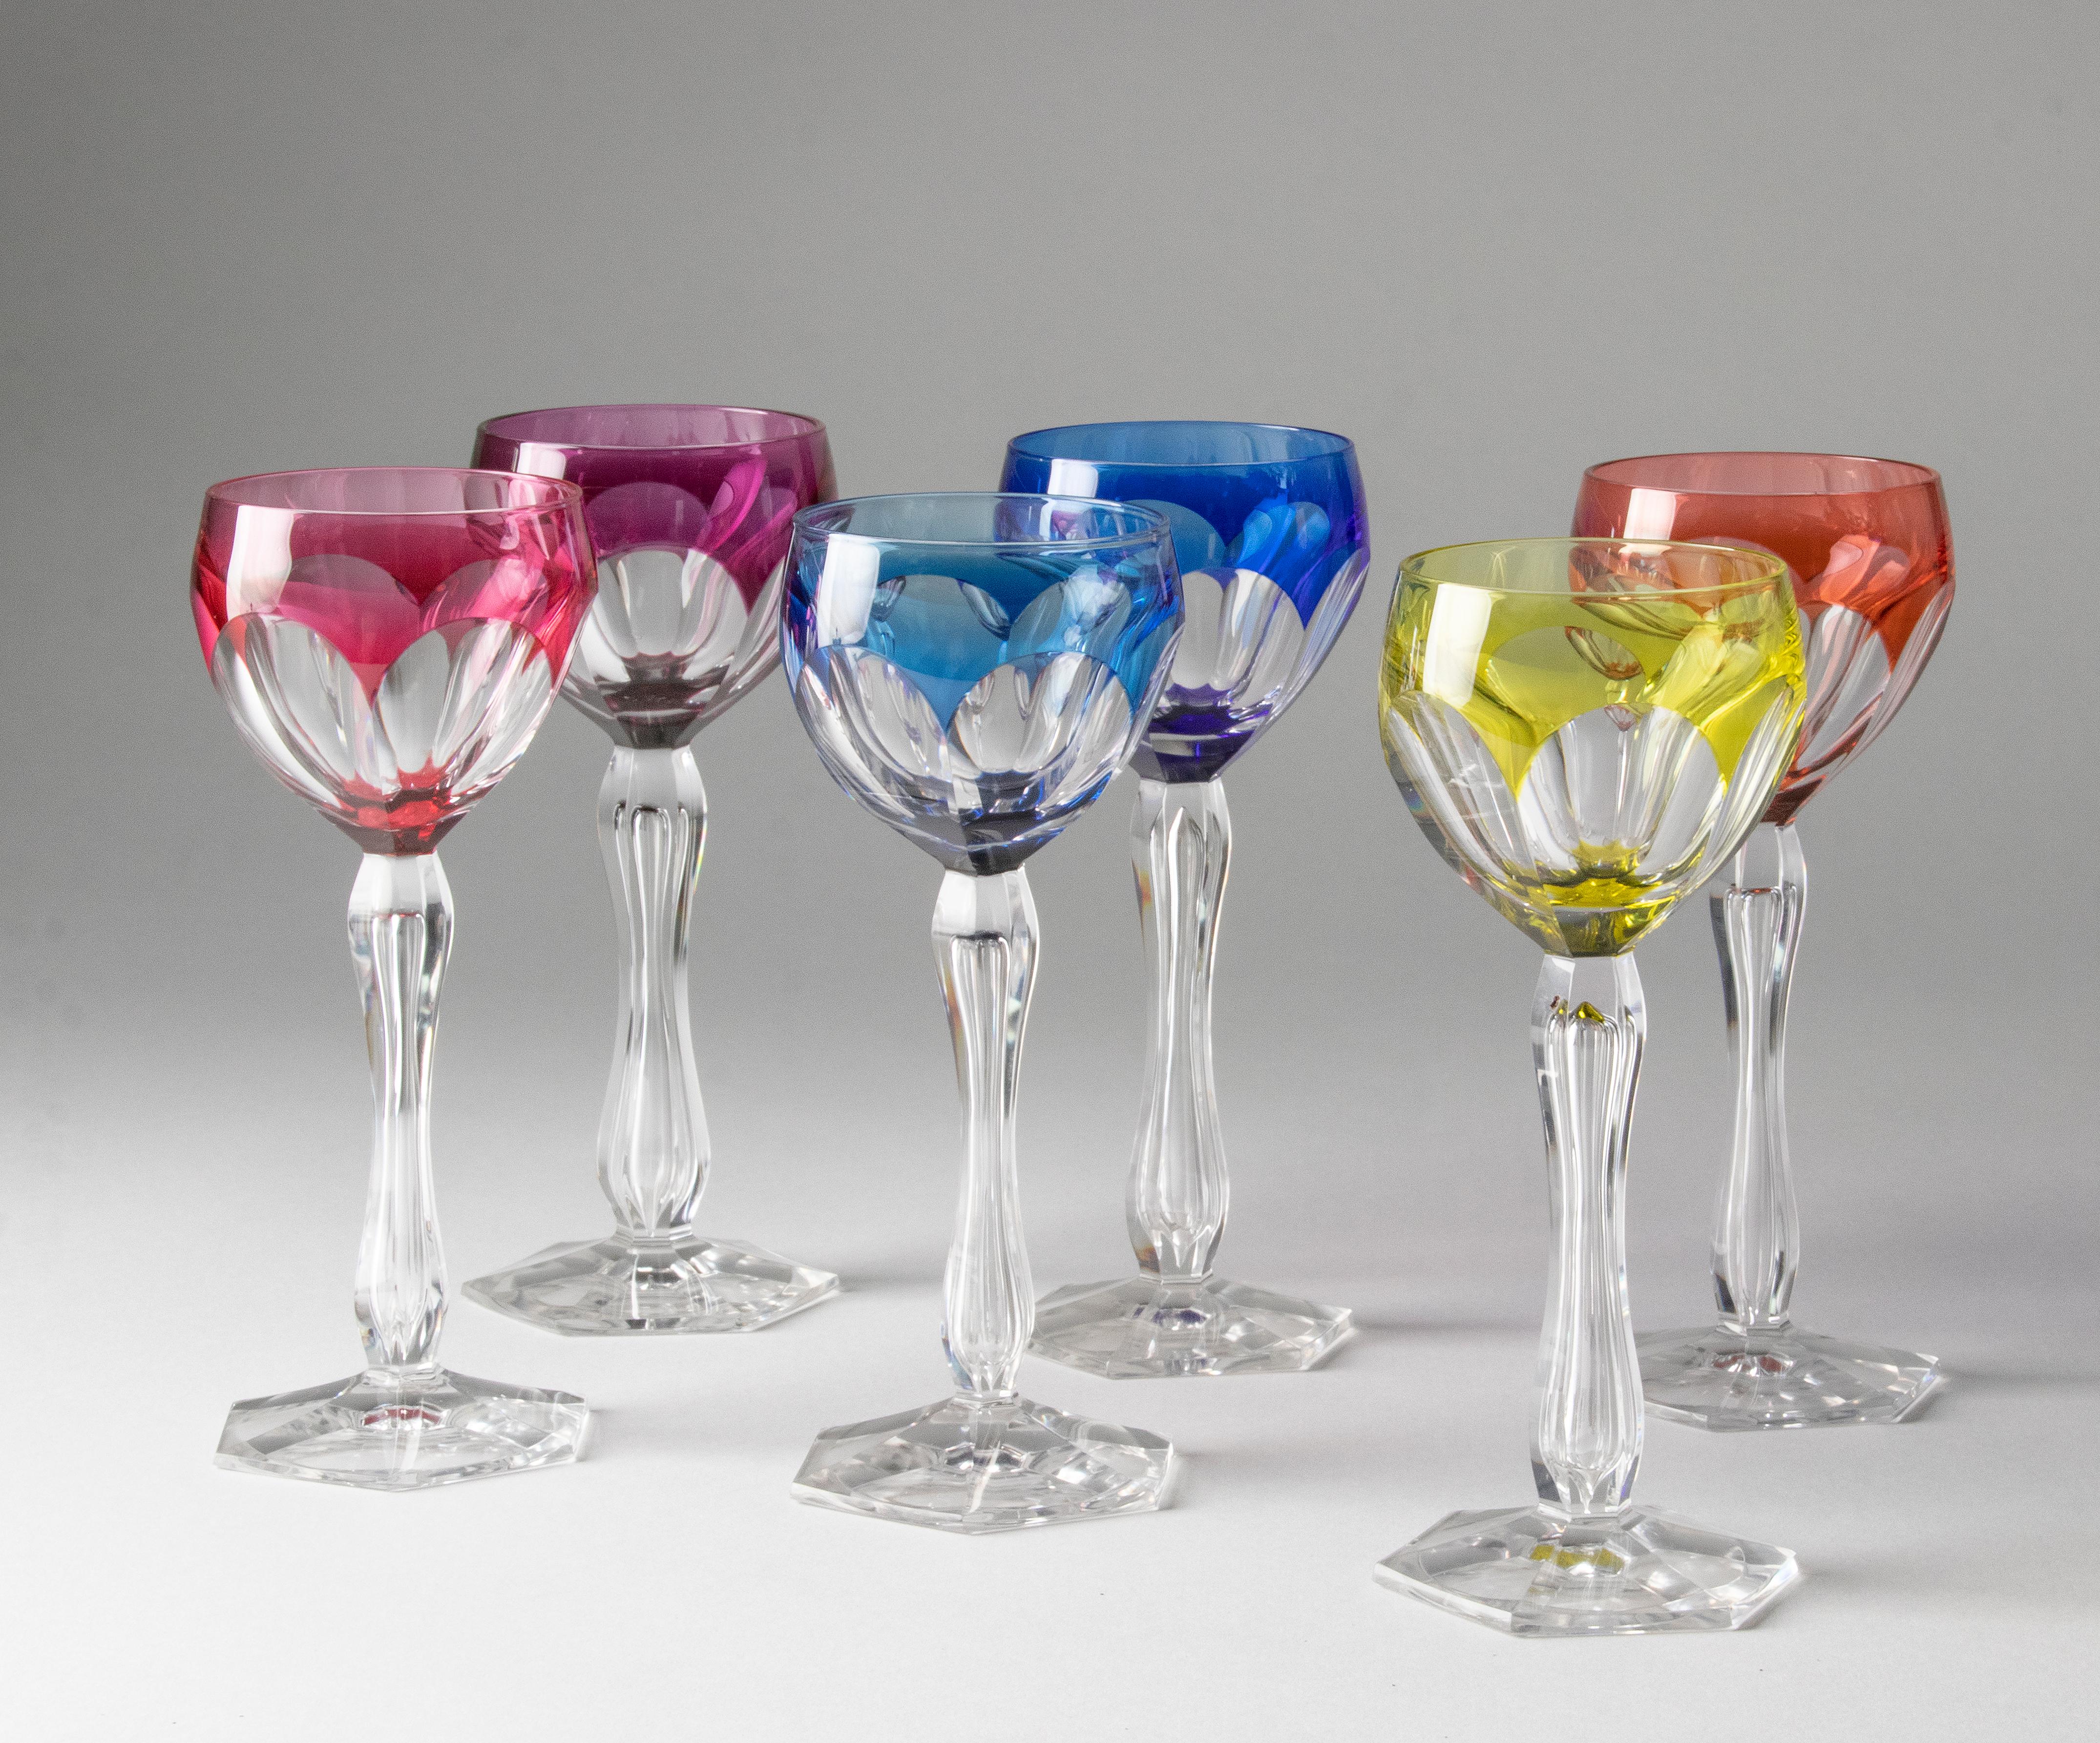 Beautiful set of 6 crystal colored wine glasses, made by the Belgian manufacturer Val Saint Lambert. The glasses have a deep, clear color and beautiful cuts. The inside of the trunk is nicely decorated. The glasses are not marked, but this is a